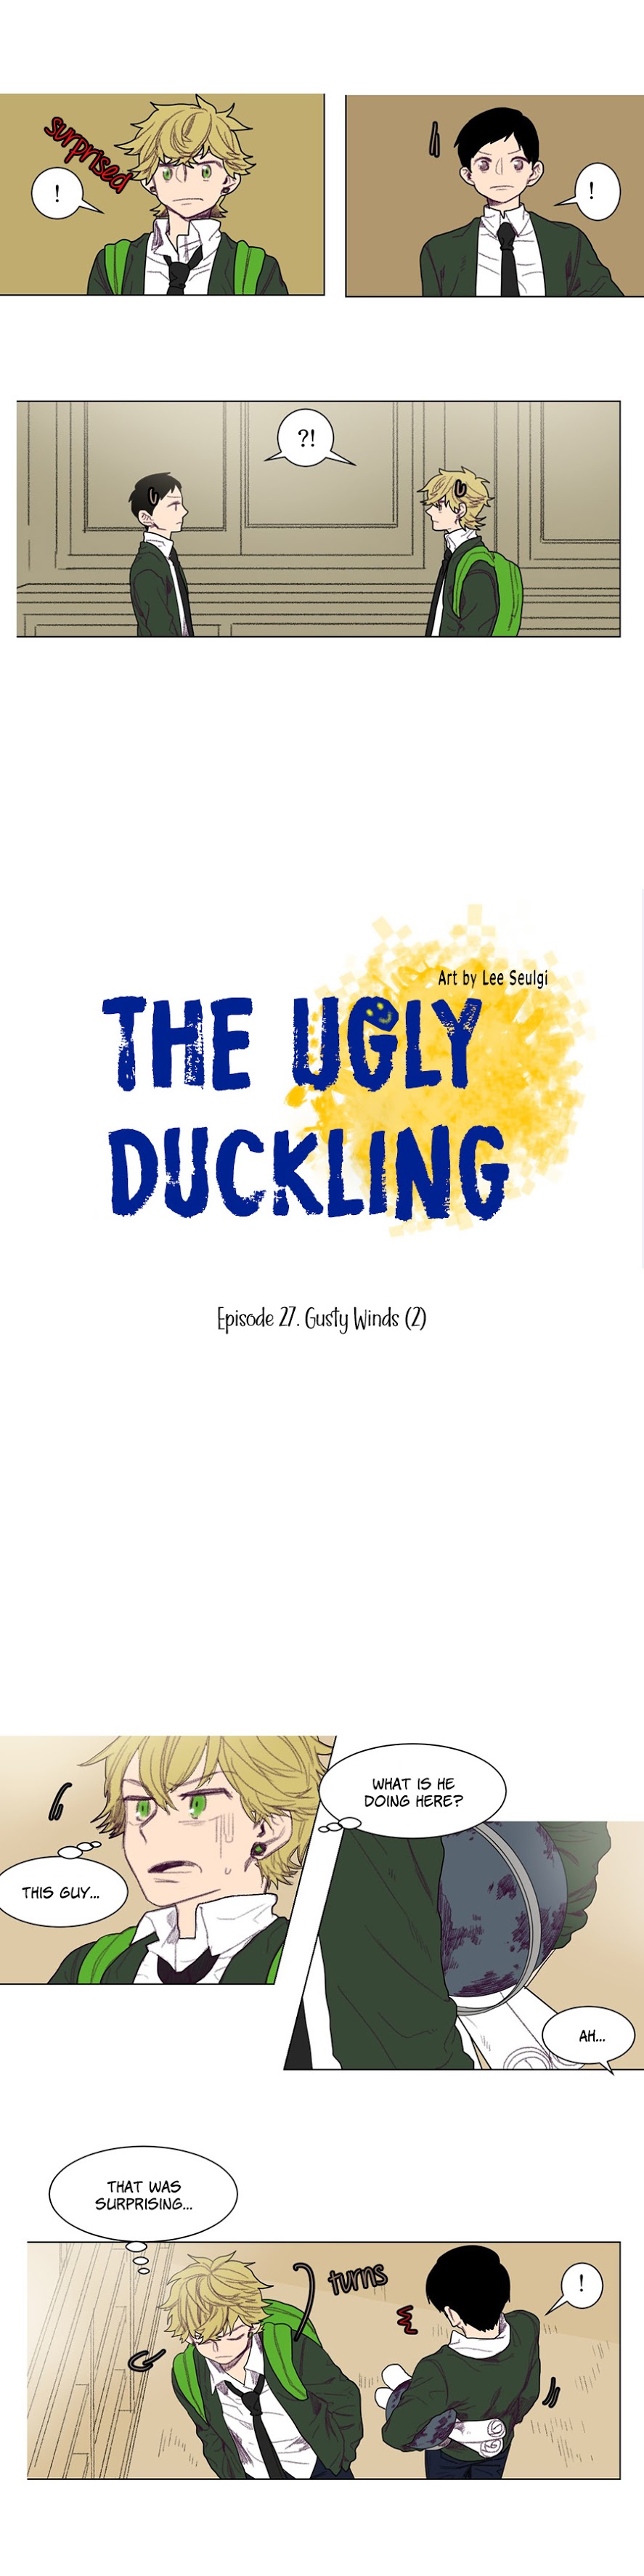 Ugly Duckling 27 2